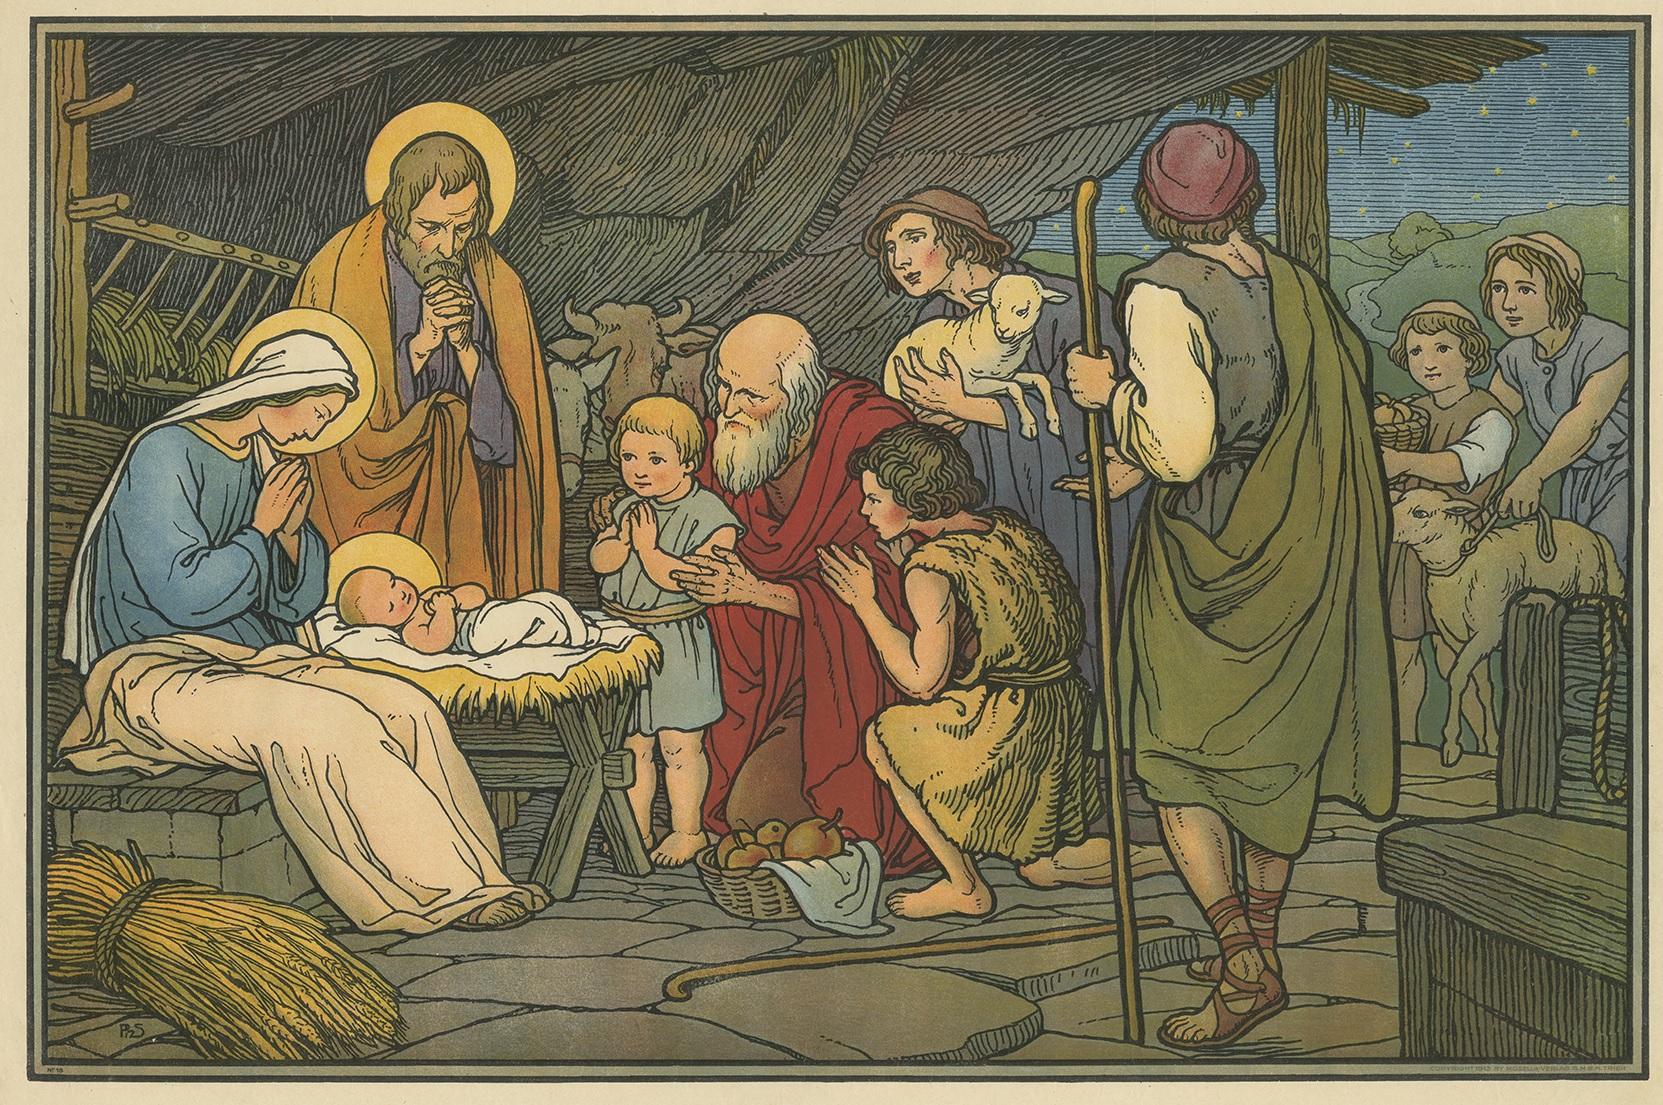 Large antique print of the adoration of the shepherds. Published by Mosella-Verlag, 1913. This print originates from a series titled 'Kathol. Schulbibelwerk von Dr. Ecker'.